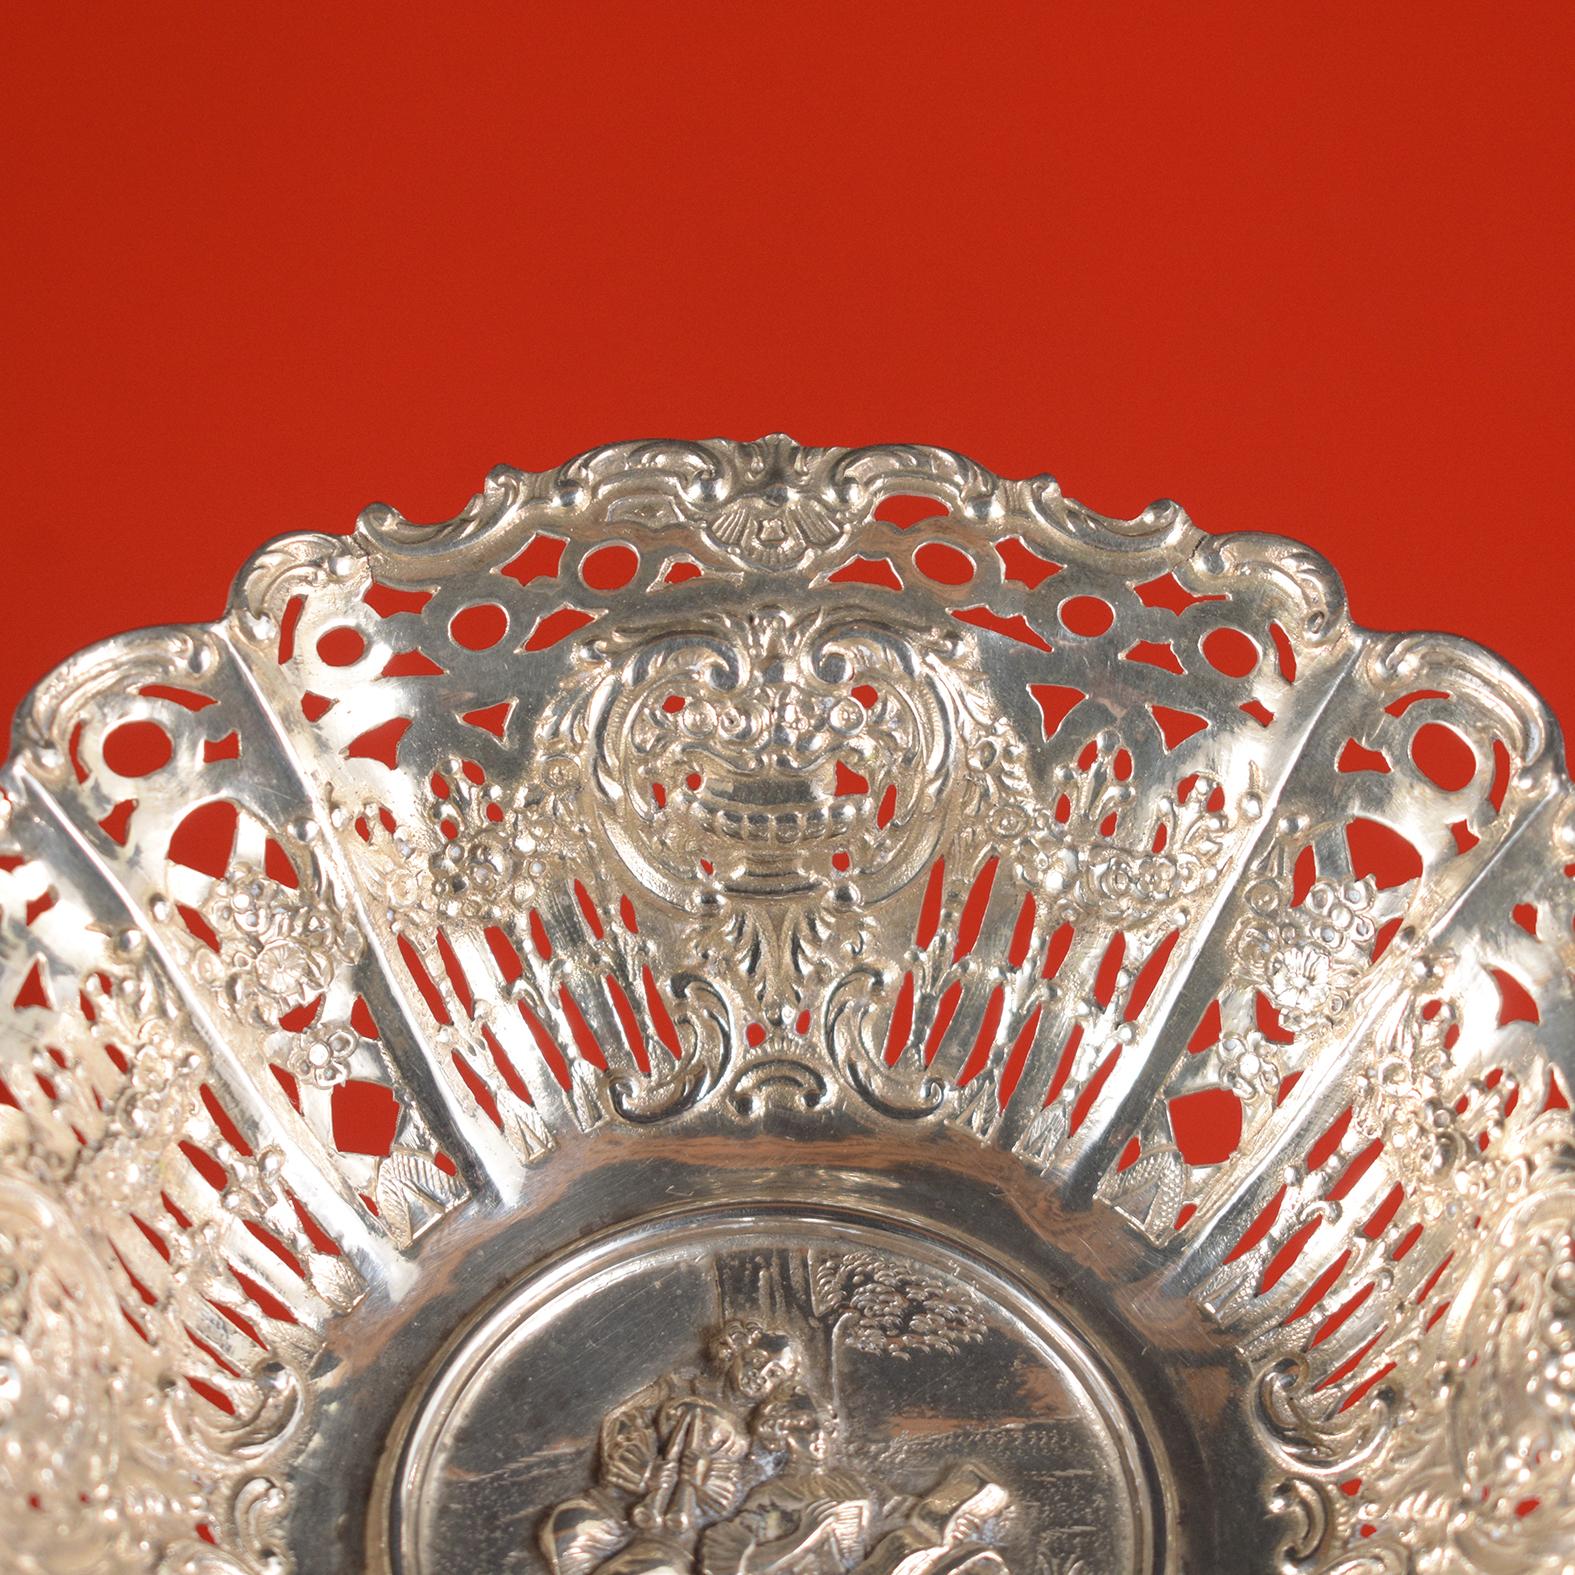 British Colonial 1970s Sterling Silver Compote: Delicate Intricate Design & Timeless Elegance